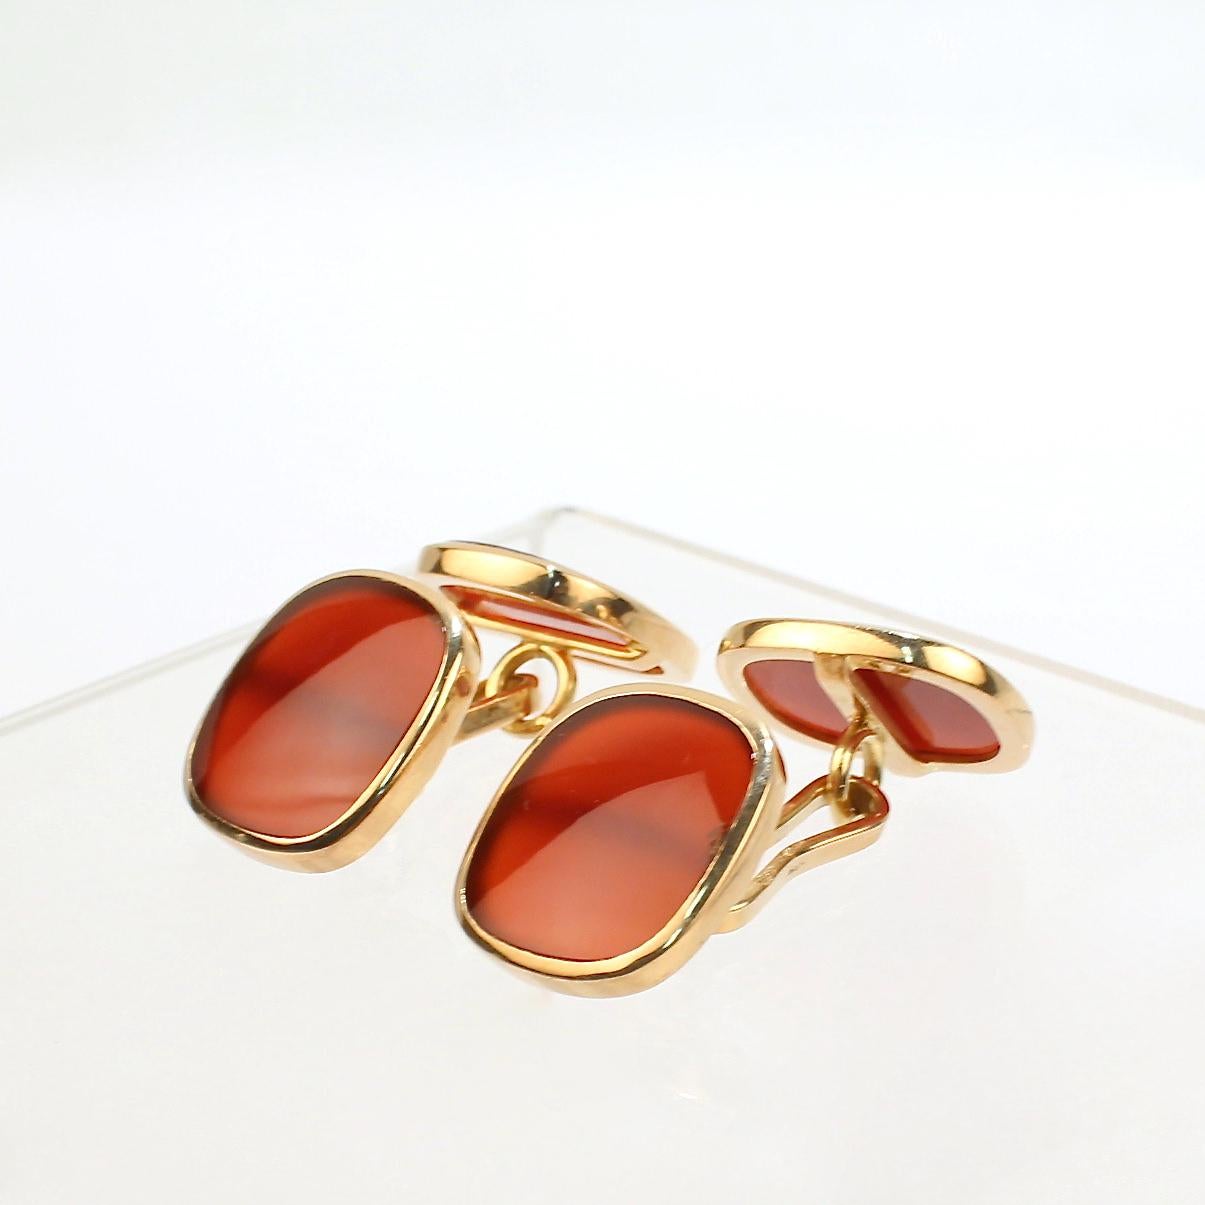 A very fine pair of Edwardian period Austrian cufflinks.

In 14k gold with flat carnelian panels.

Marked G.P. likely for Chaja Paltzew.

An exciting pair of Edwardian period cufflinks!

Date: 20th Century

Overall Condition:
They are in overall